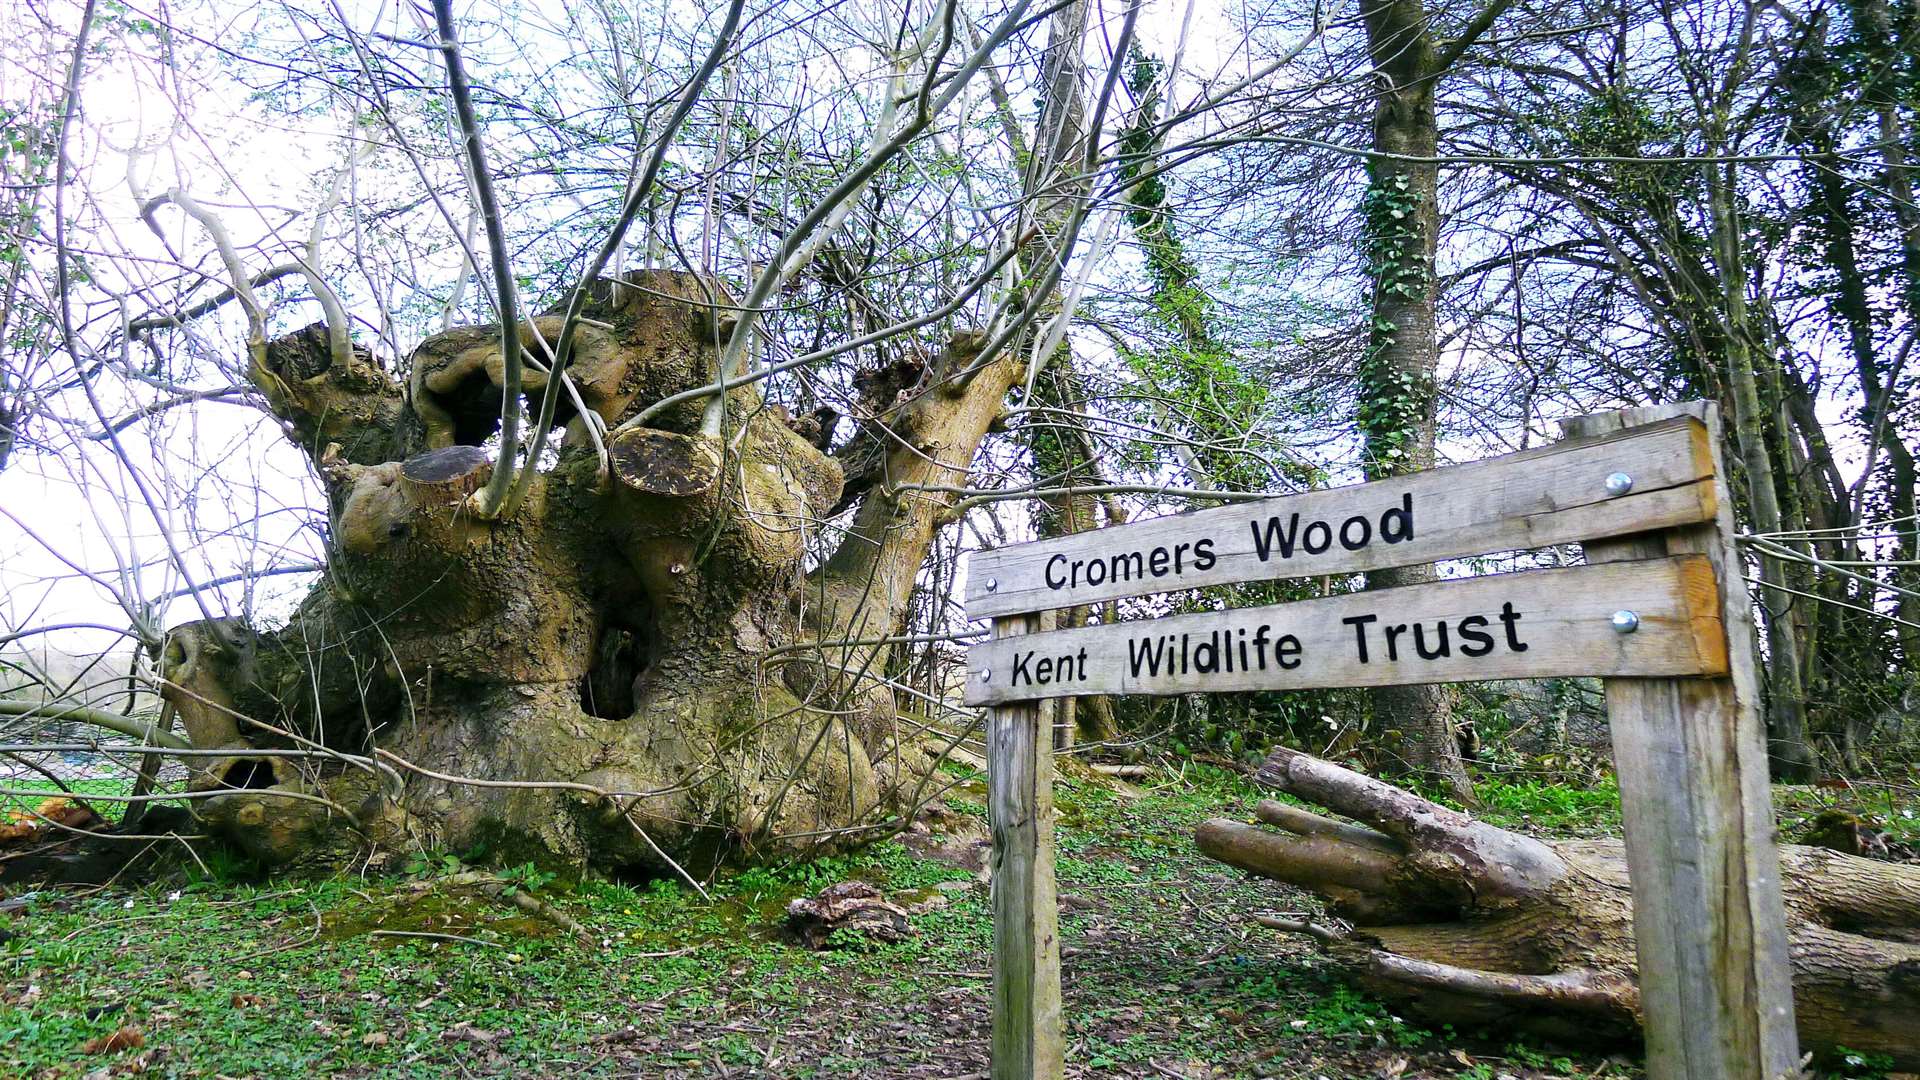 Cromer's Wood in Sittingbourne is in for a £25,000 funding boost